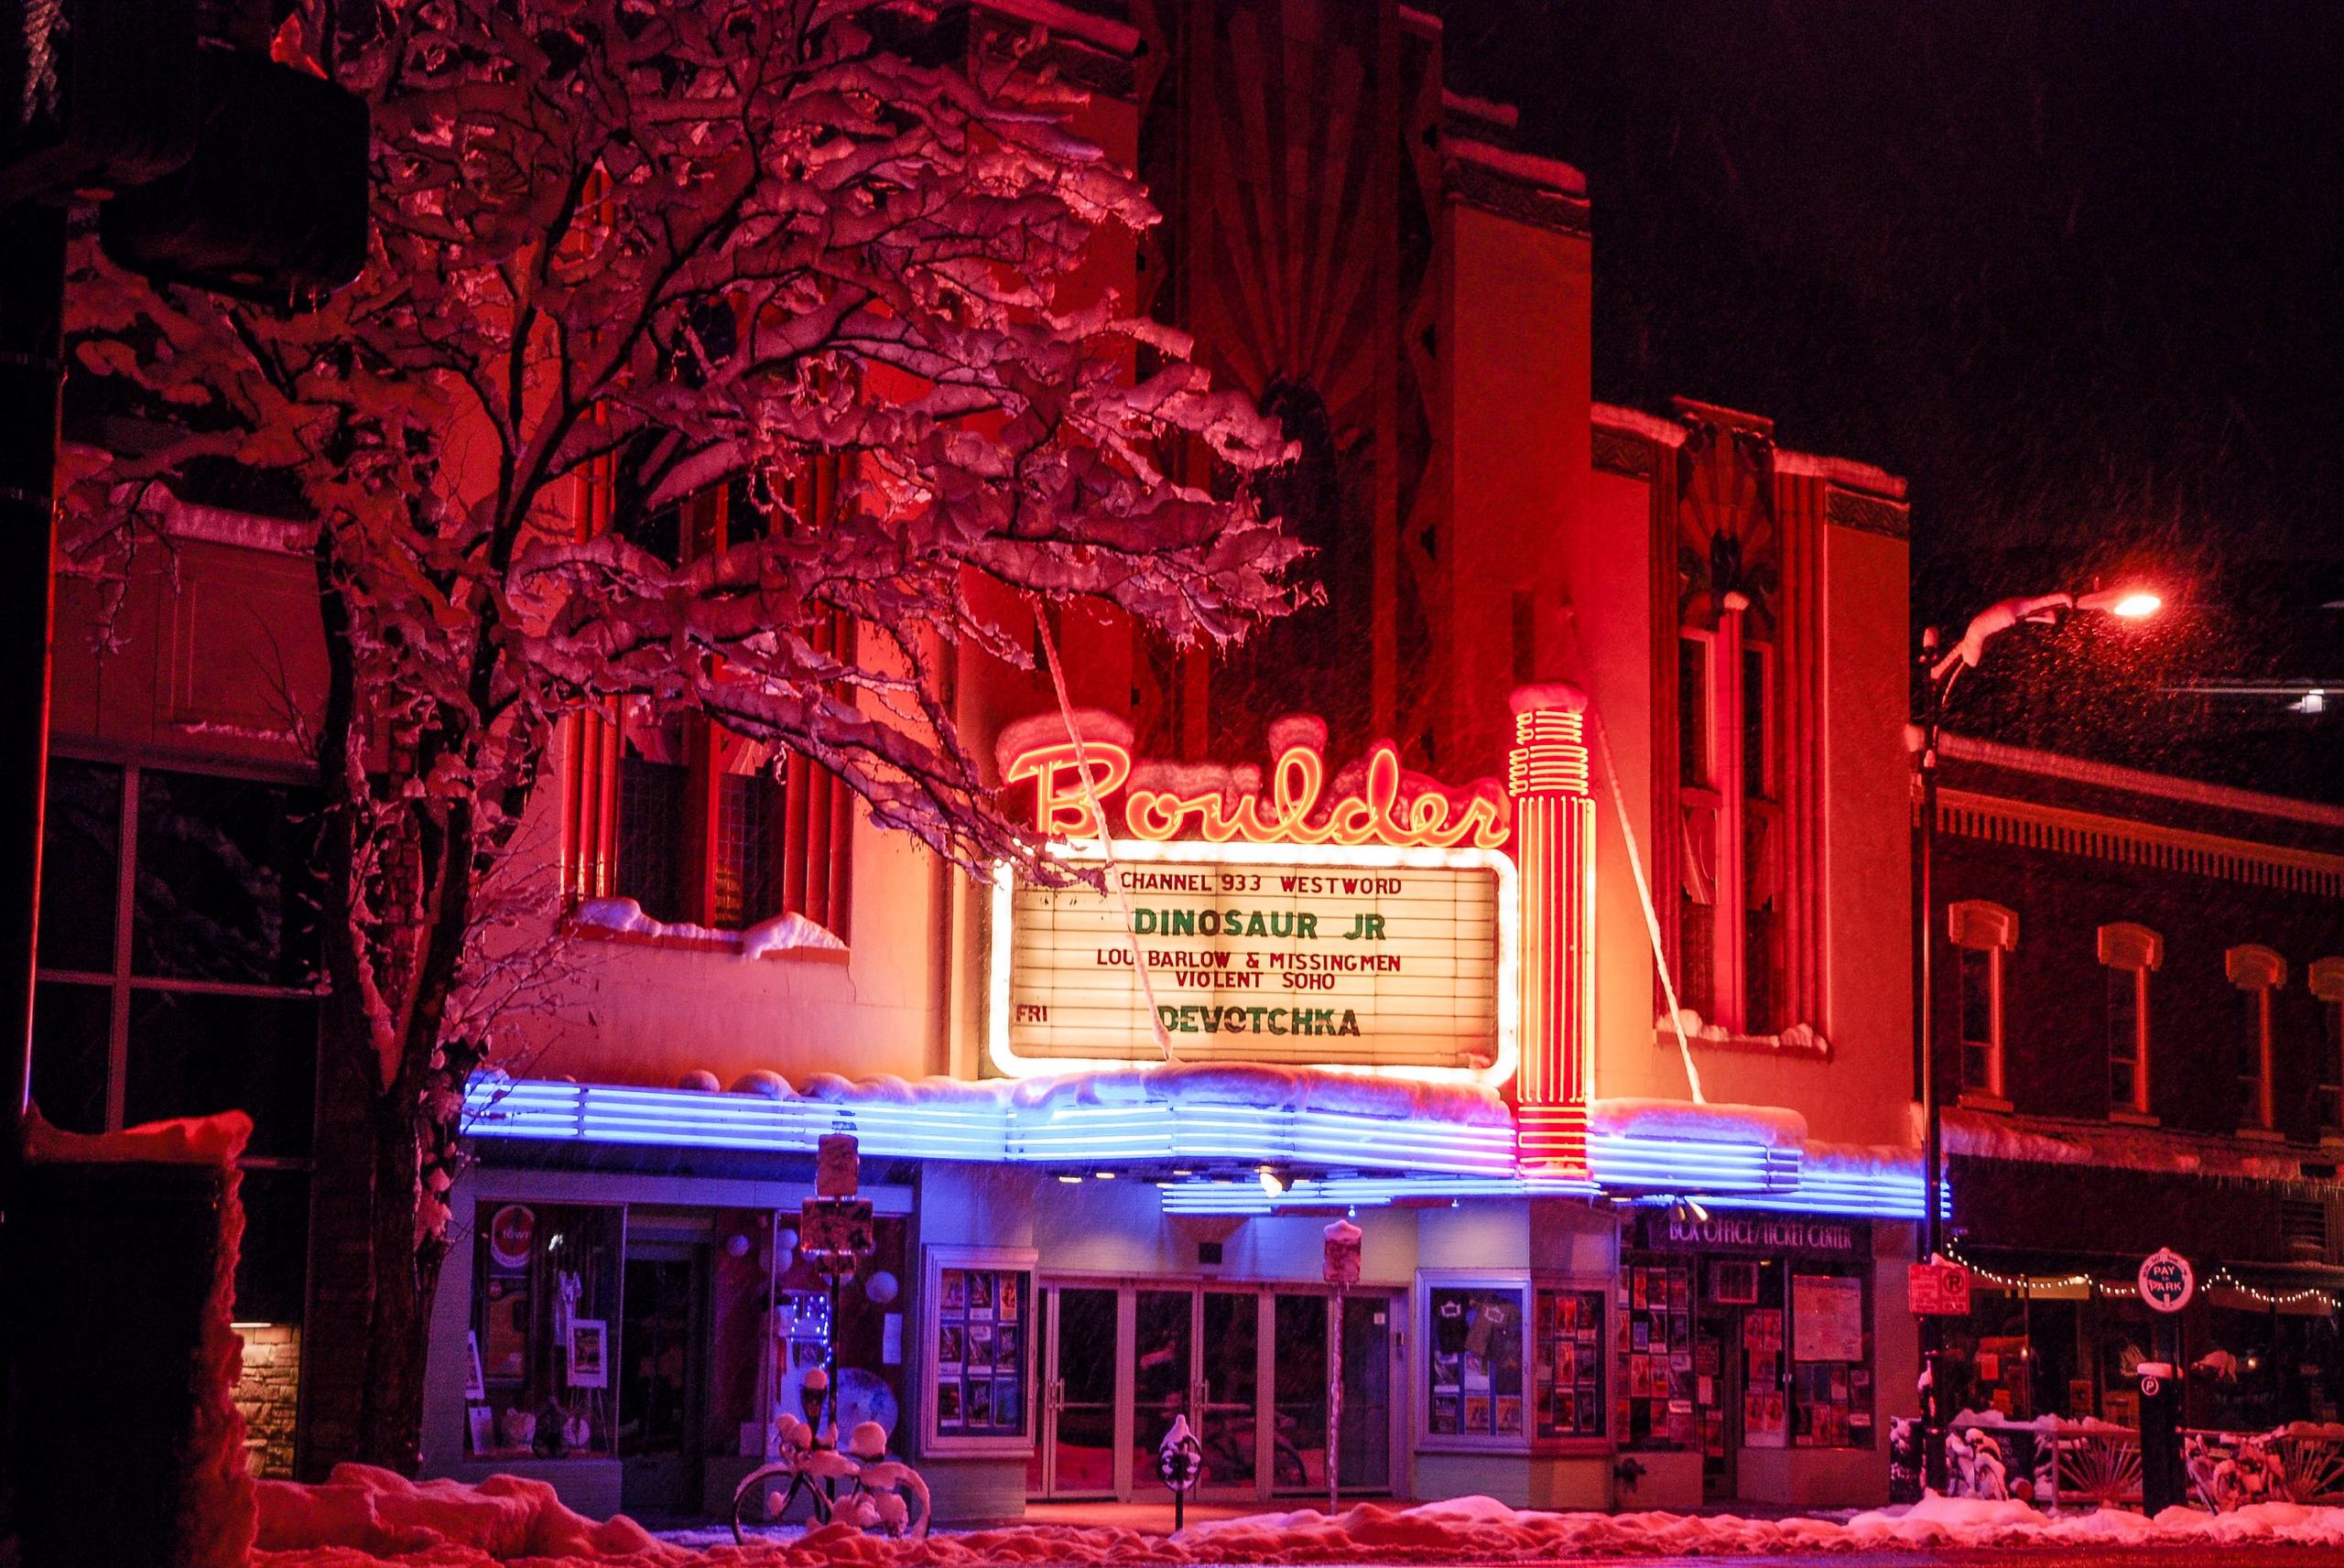 Exterior of Boulder Theater lit up at night